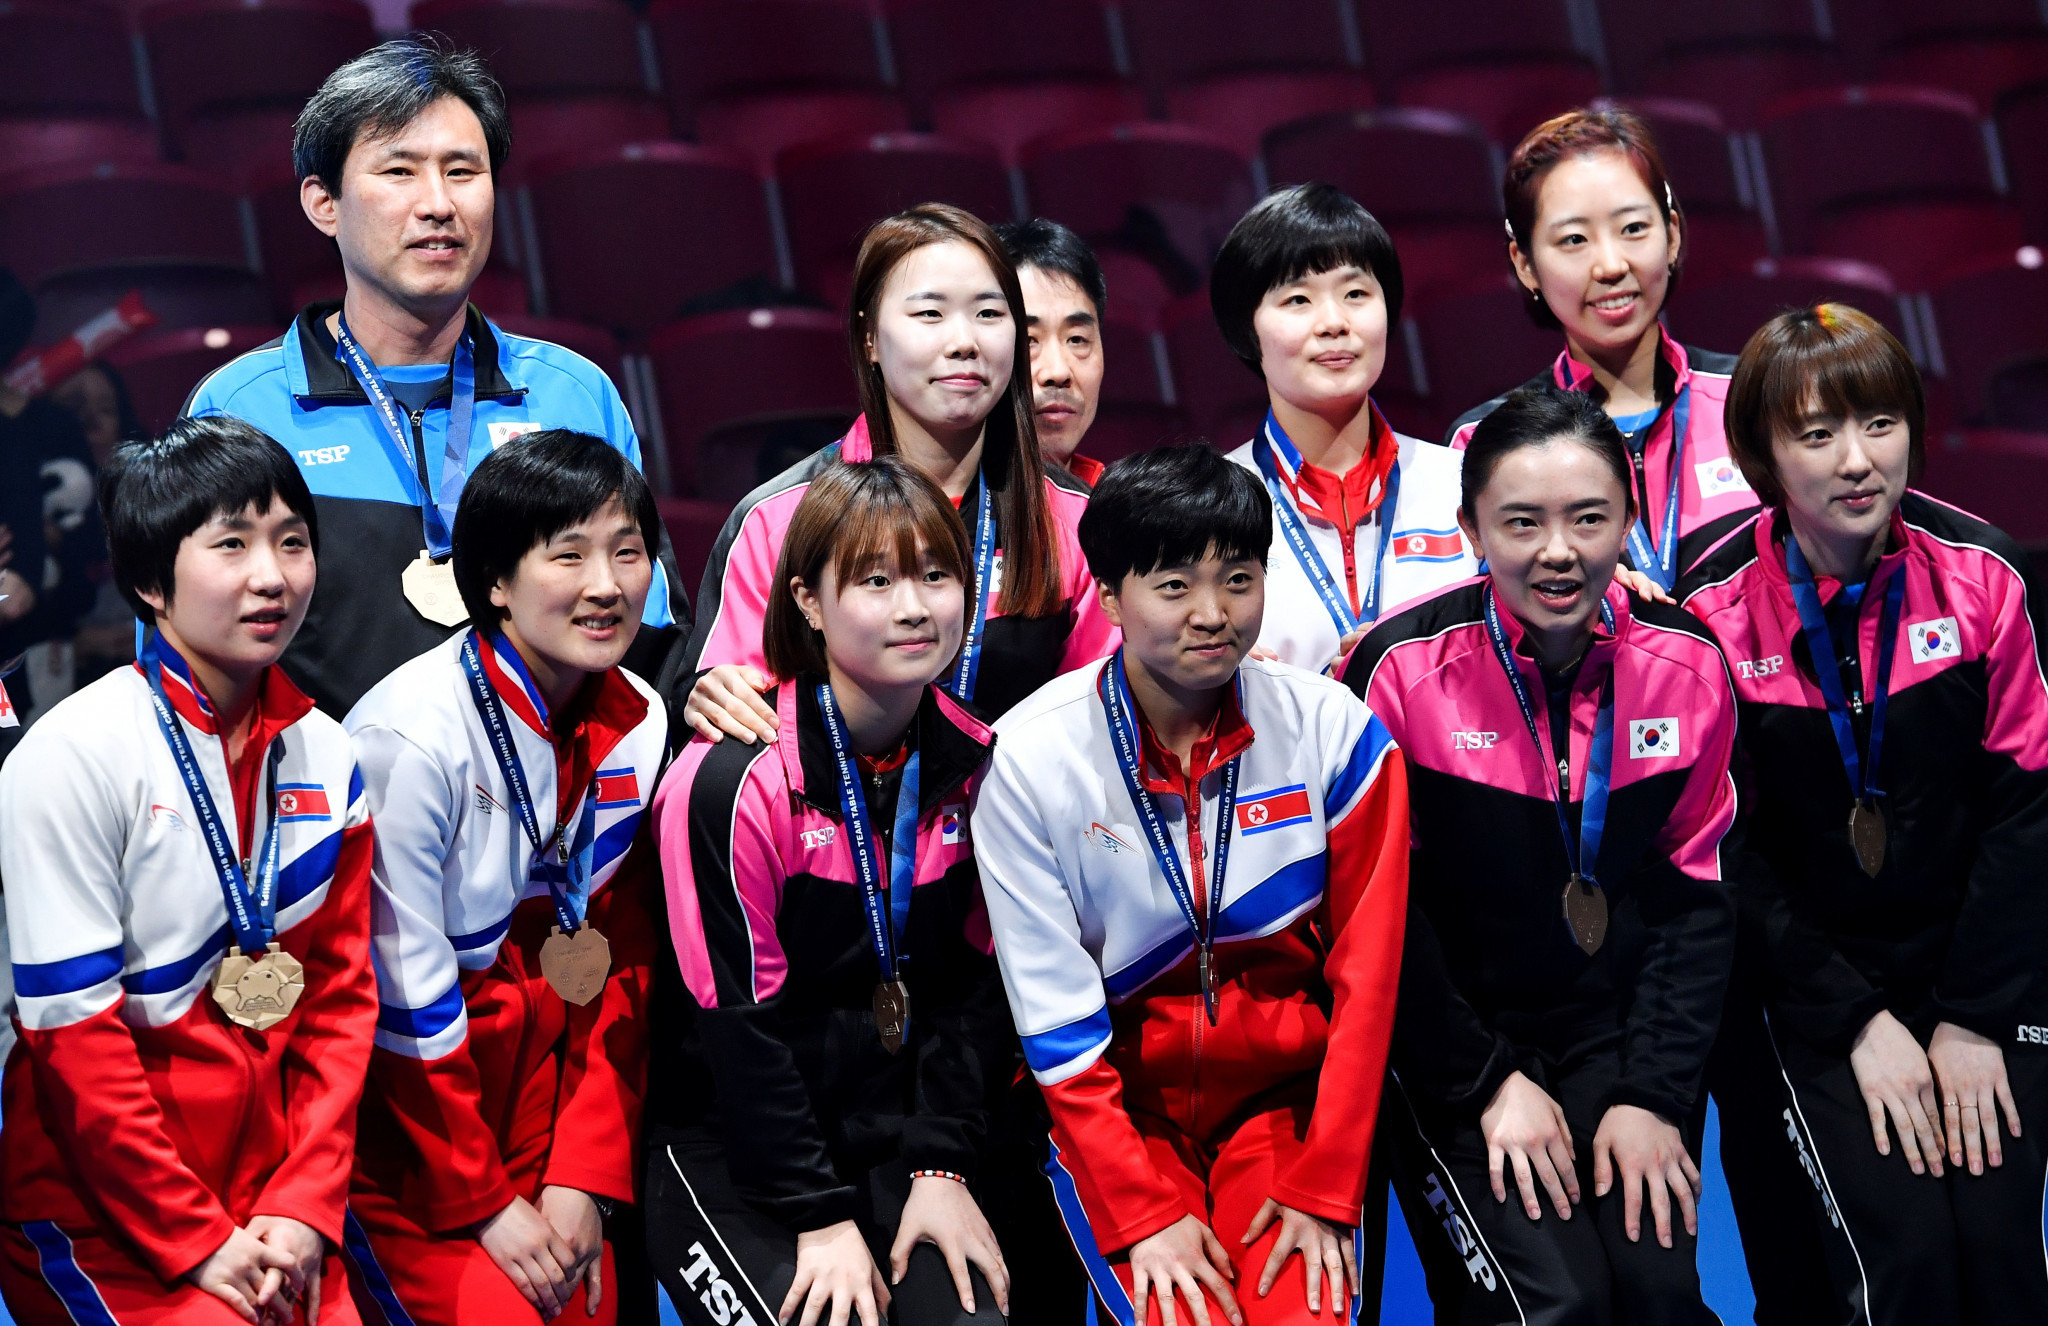 Coach expresses hope of joint Korean table tennis team at Asian Games but warns decision should be taken for sporting reasons